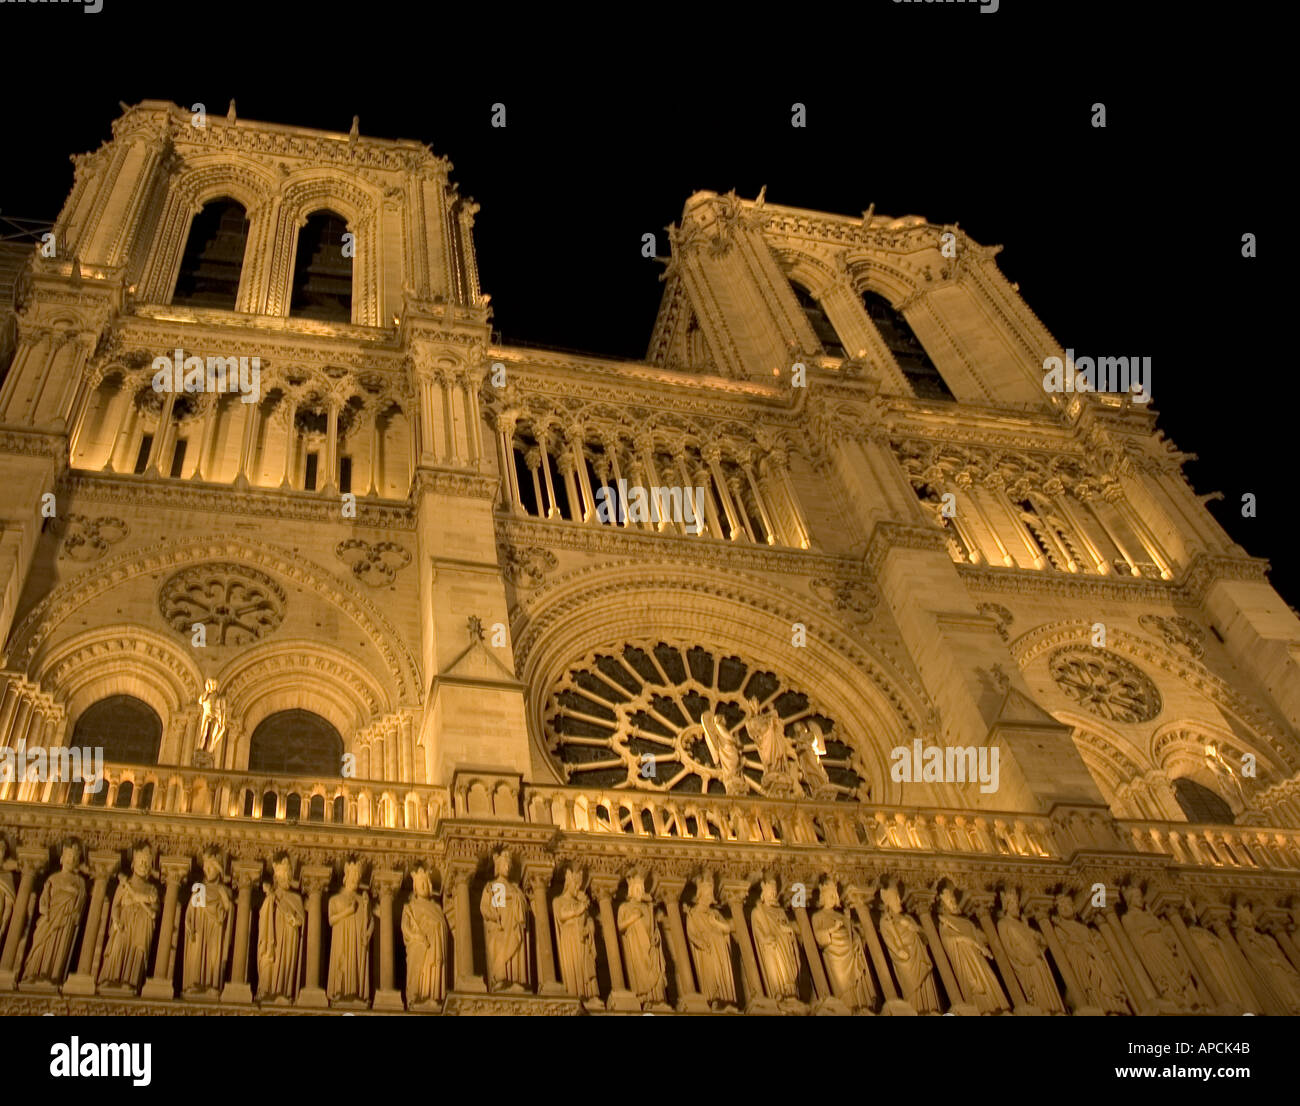 Looking up at Notre Dame in Paris at night prior to the devastating fire of April 15 2019. Stock Photo